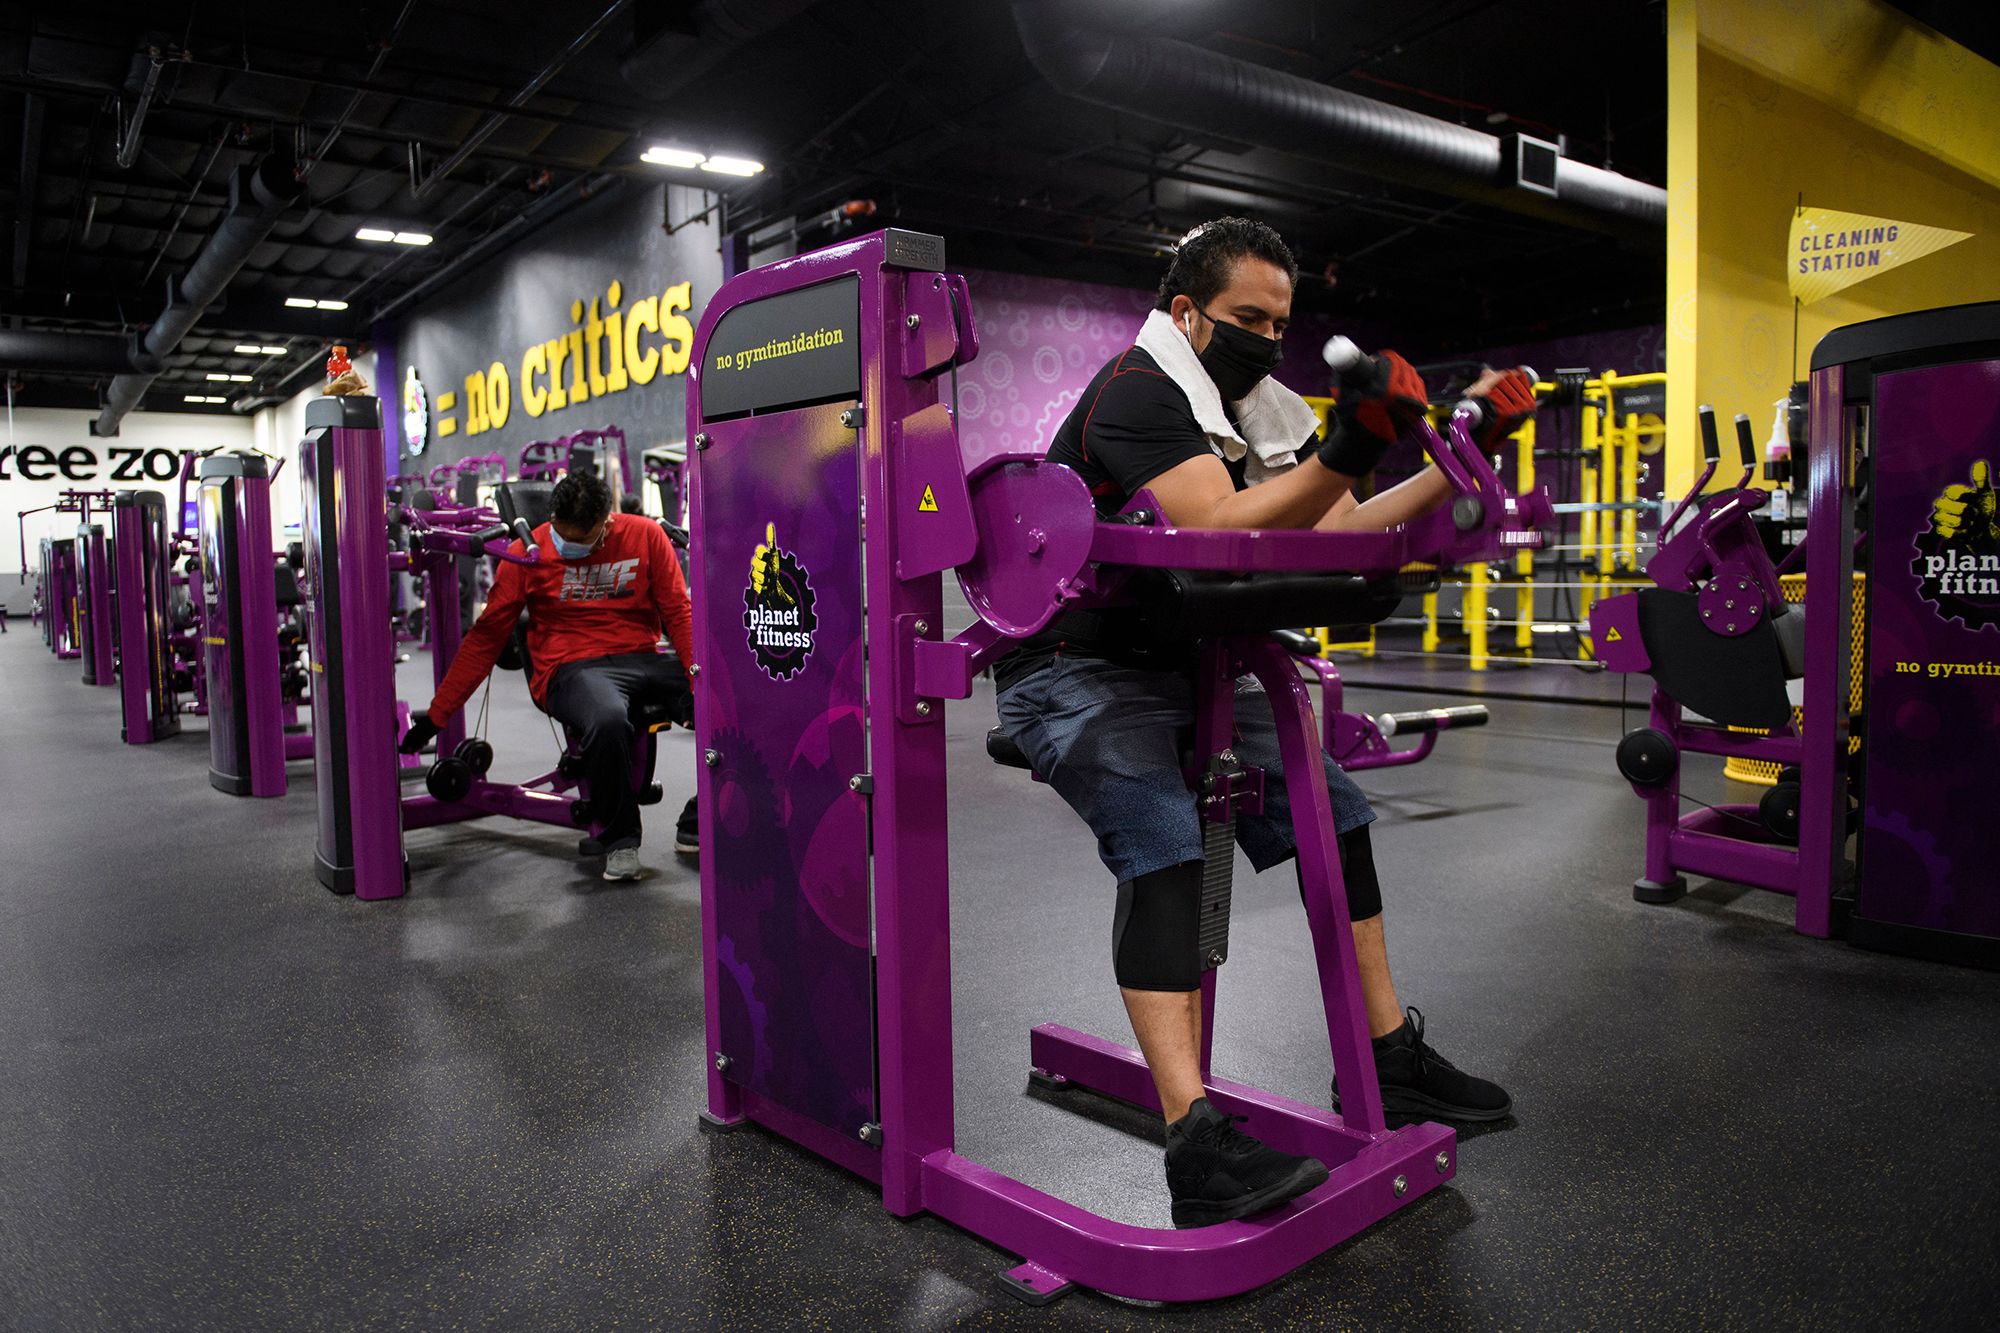 6. Stationary Bikes Commonly Found at Planet Fitness Gyms